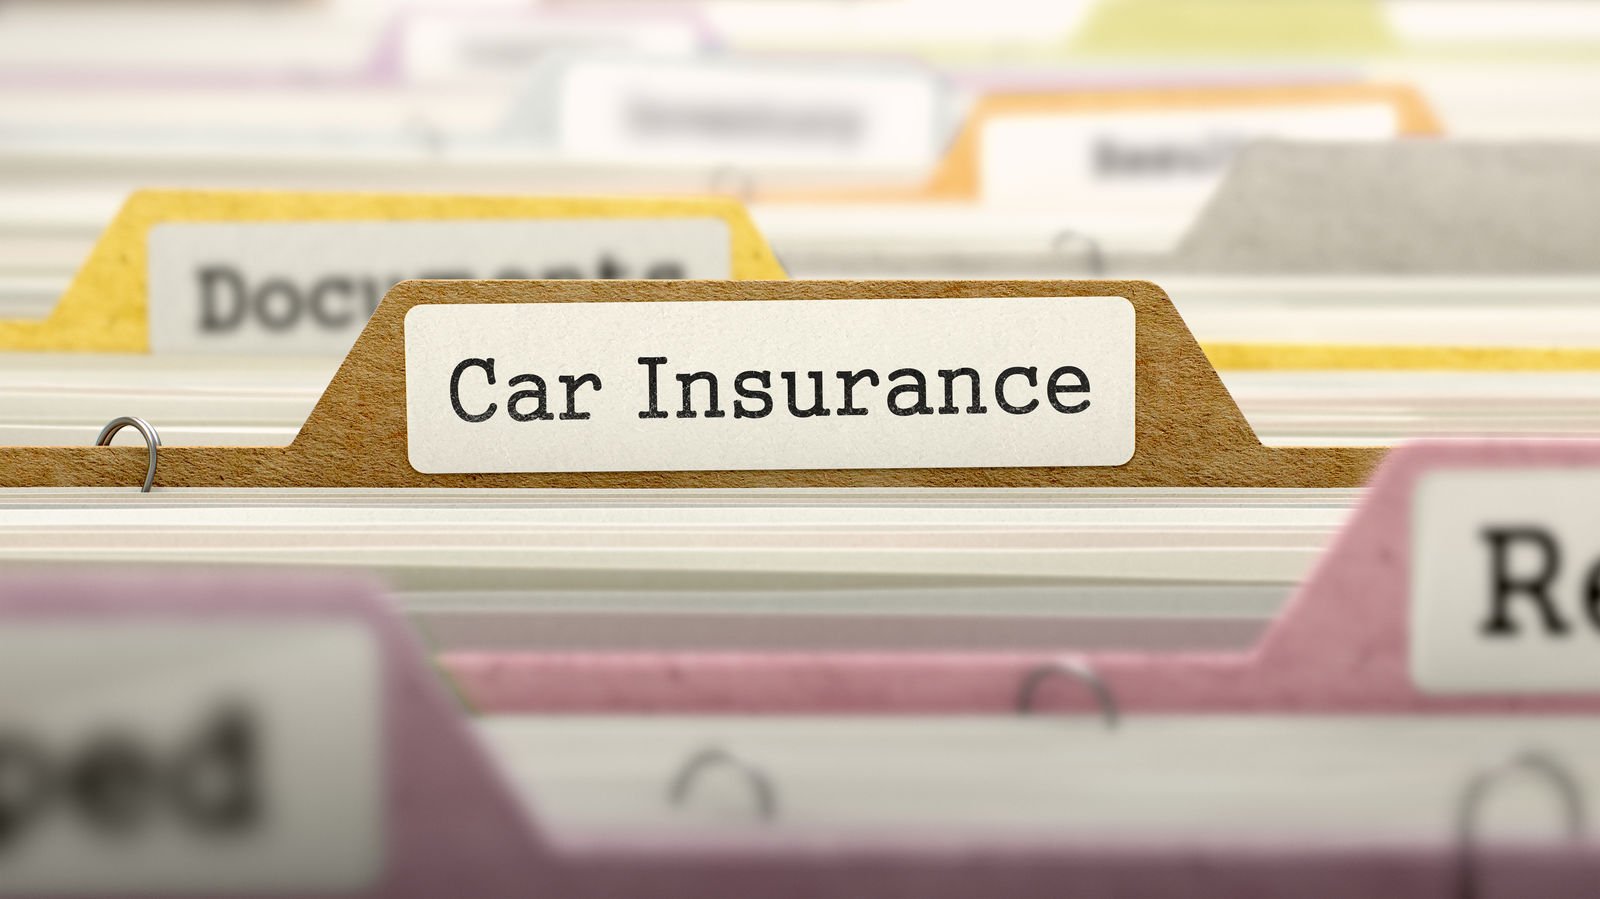 Why do car insurance rates vary so much?